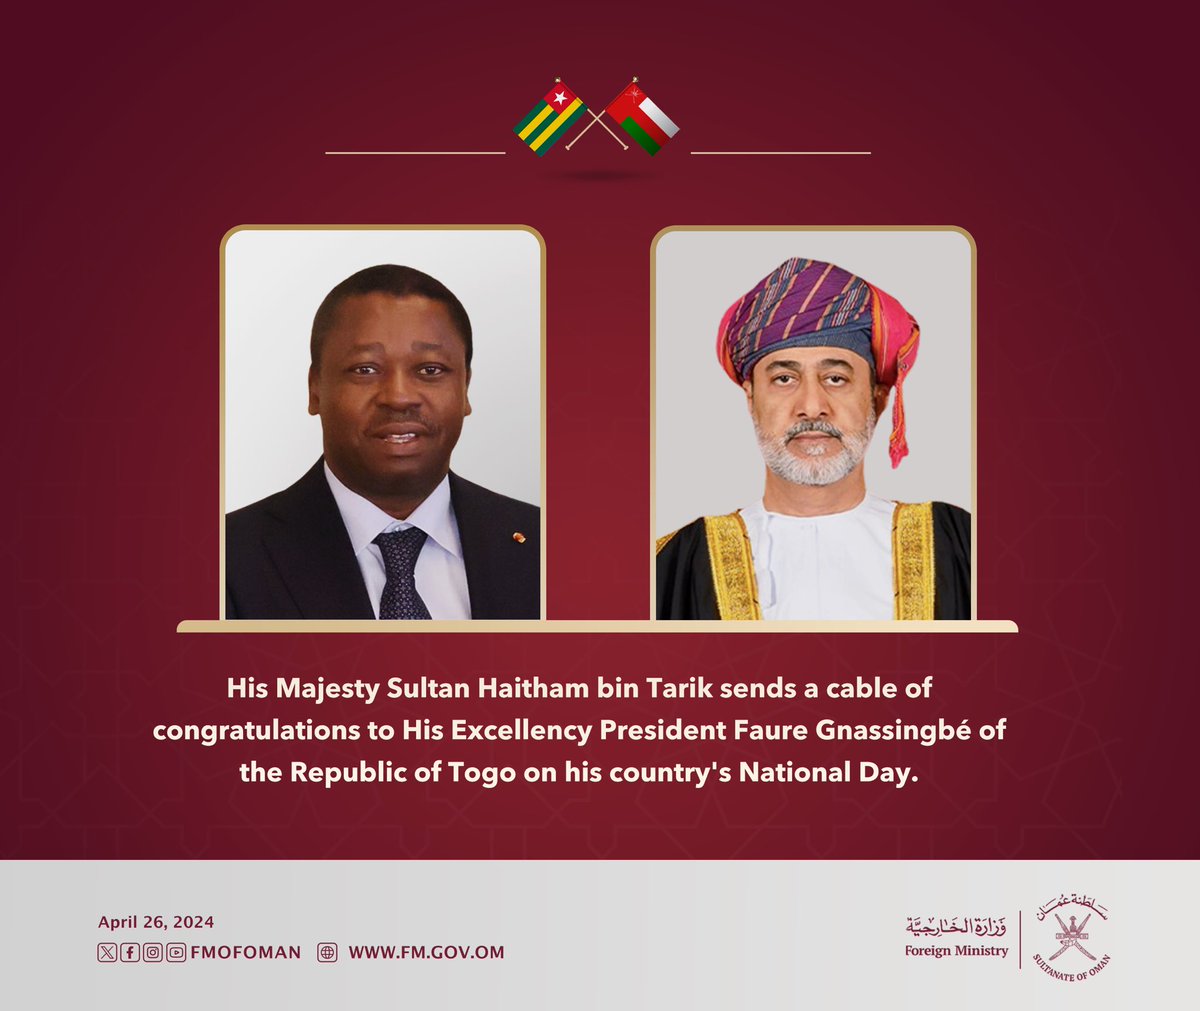 His Majesty the Sultan sends a cable of congratulations to His Excellency President Faure Gnassingbé of the Republic of #Togo on his country's National Day.